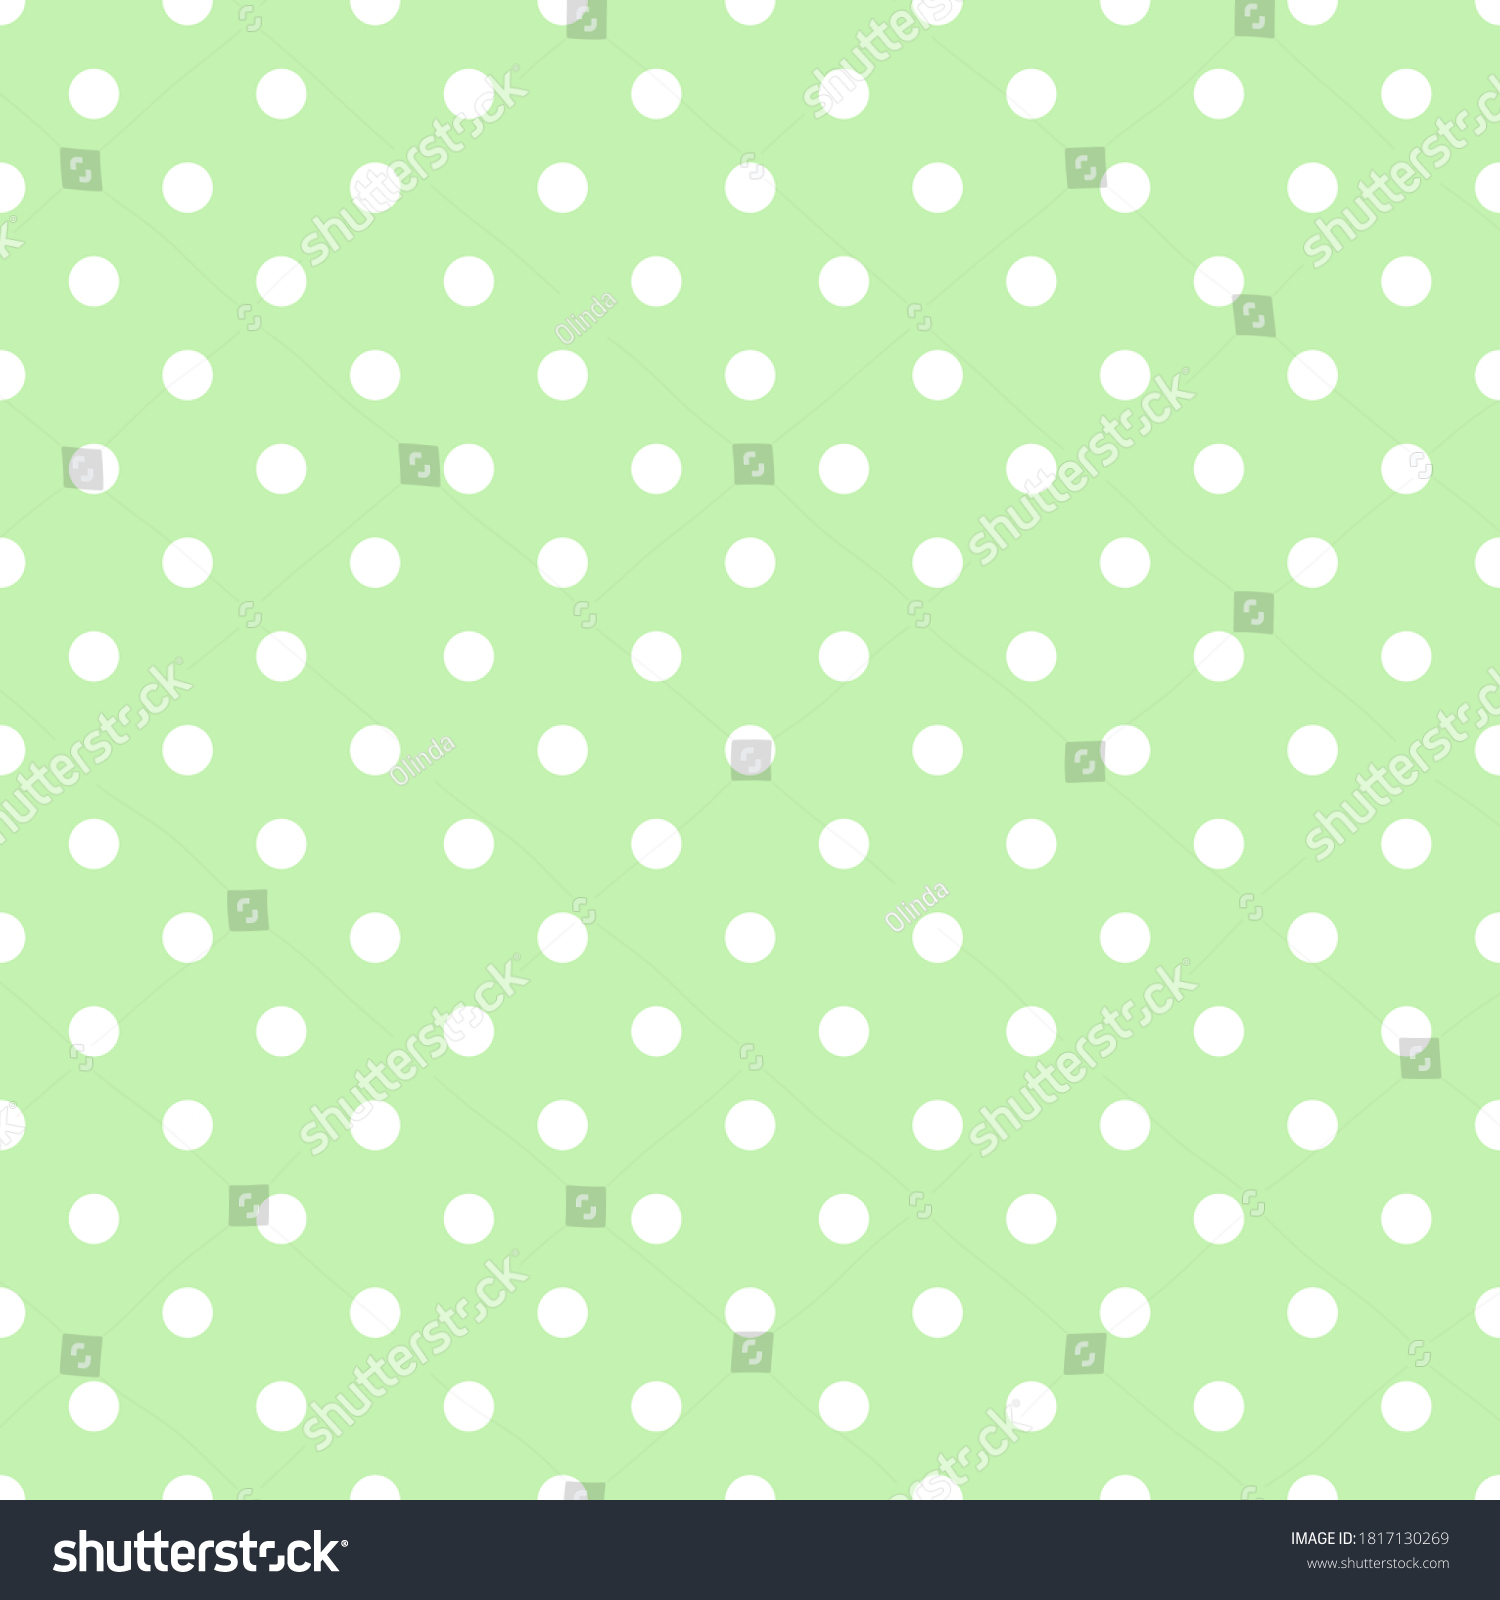 SVG of Seamless pattern white small polka dots on pastel chartreuse green background. Elegant print for fabric textile gift paper scrapbook wallpaper kids clothes nursery decor svg